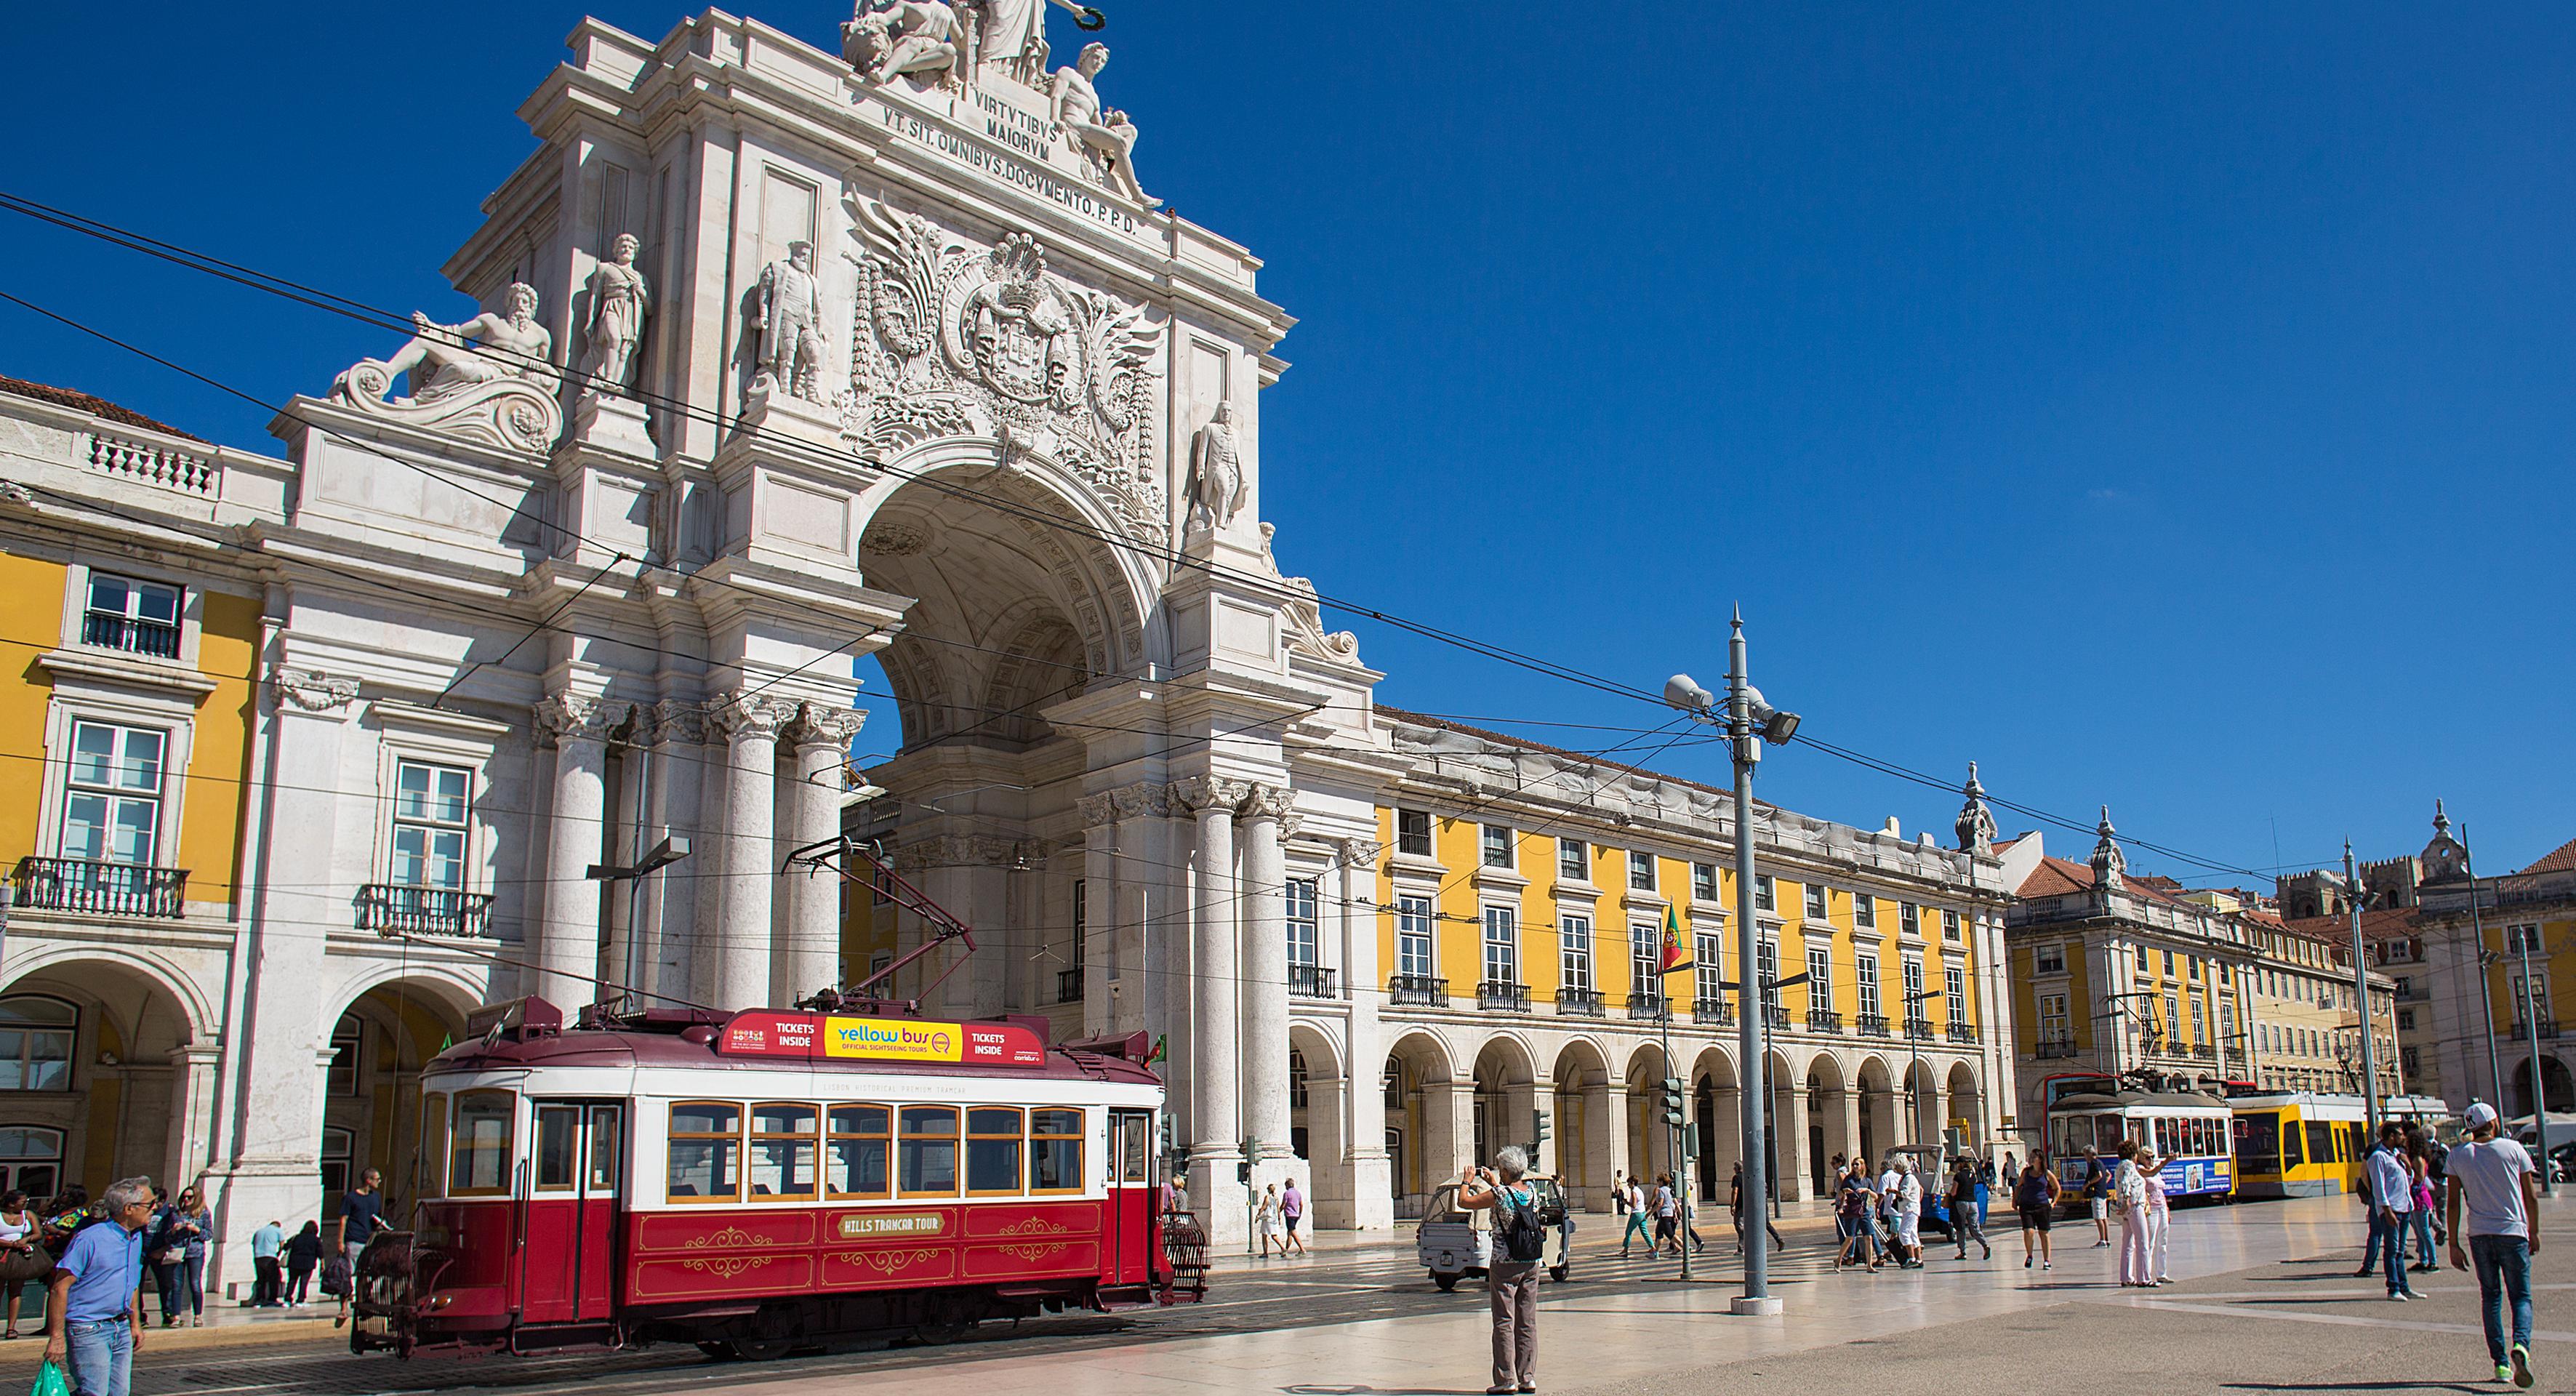 72hr. Transport Pass and Activities - Hop-on, Hop-off Bus, Tram, and Boat - Lisbon